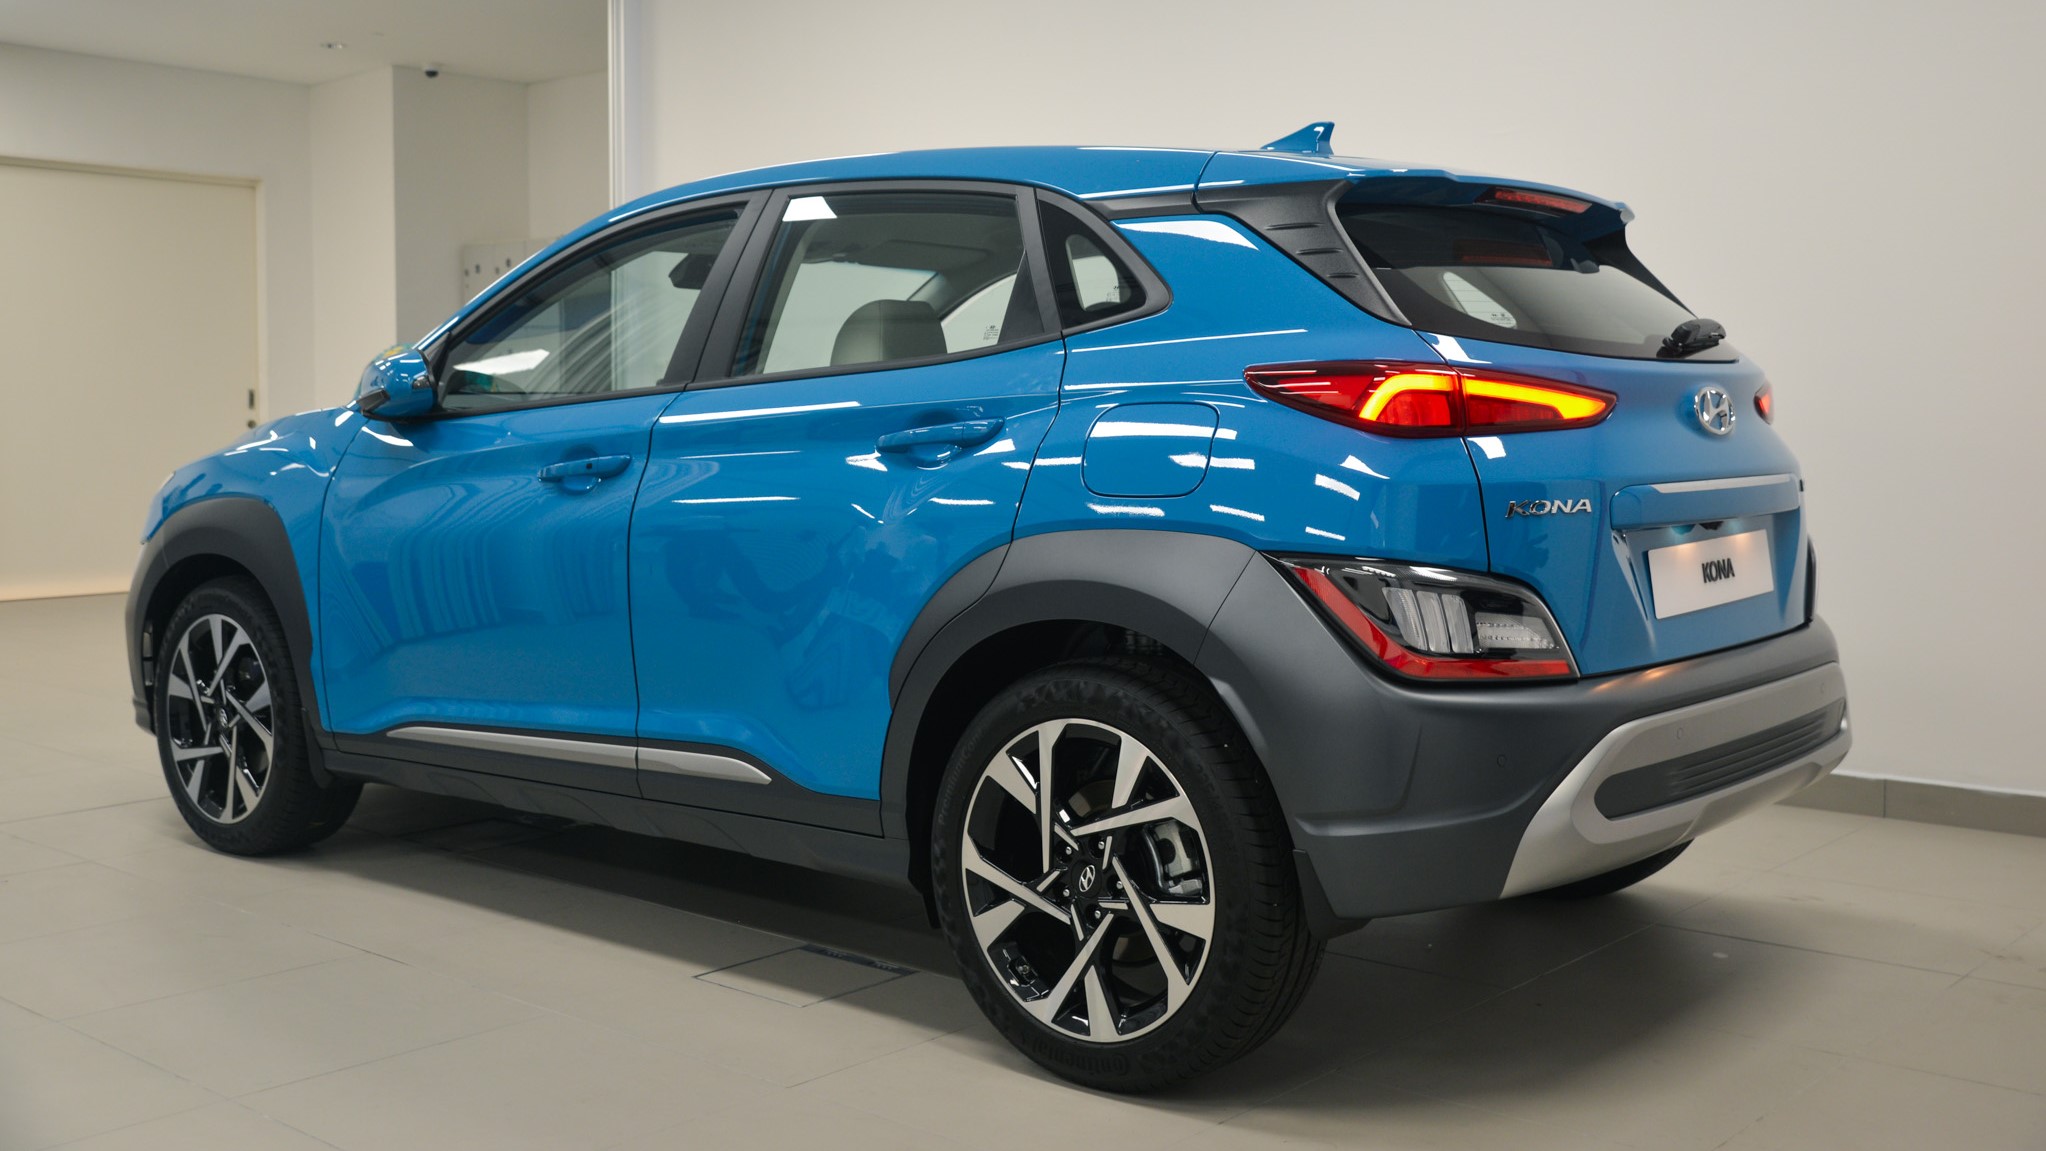 2021 Hyundai Kona: facelifted crossover reaches Malaysia in record time